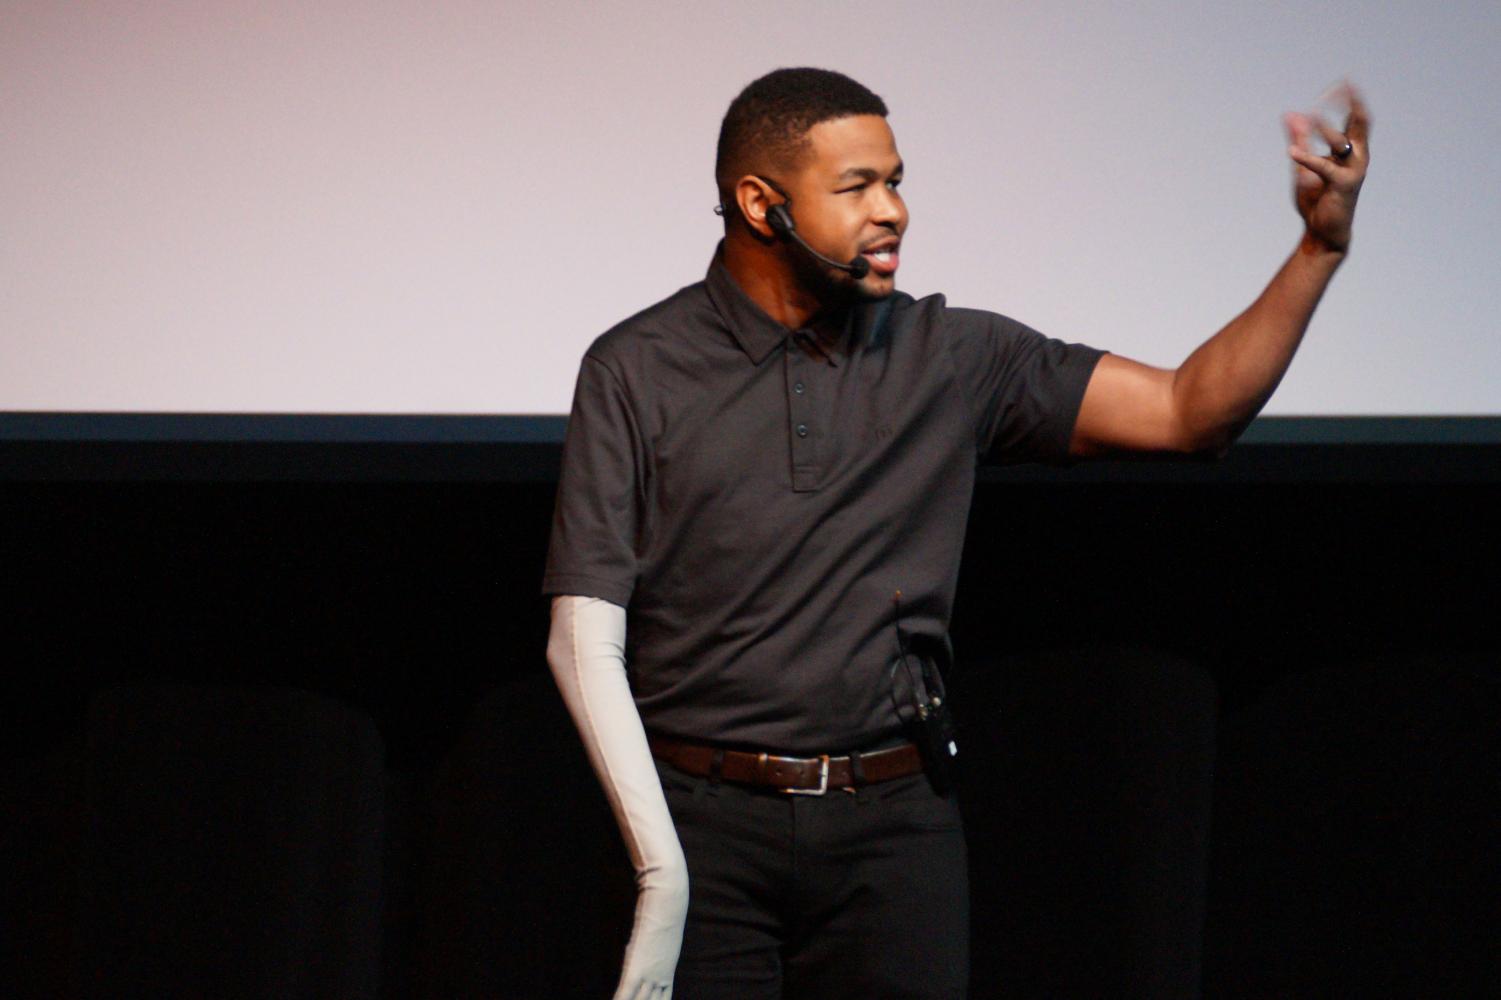 Inky Johnson wearing a black t-shirt with a black jeans during one of his speeches